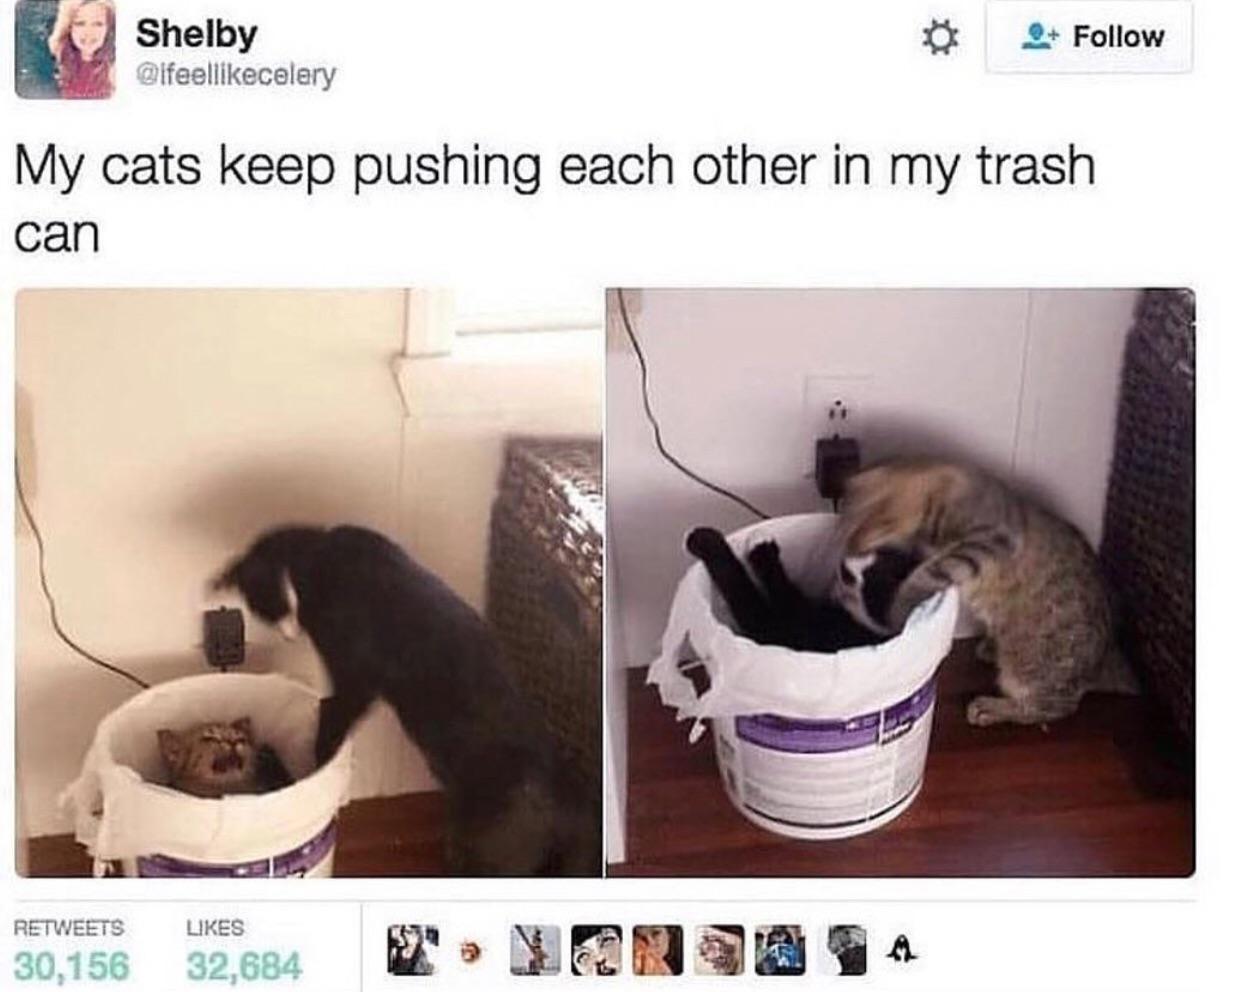 my cats keep pushing each other - Shelby My cats keep pushing each other in my trash can 30,156 32,684